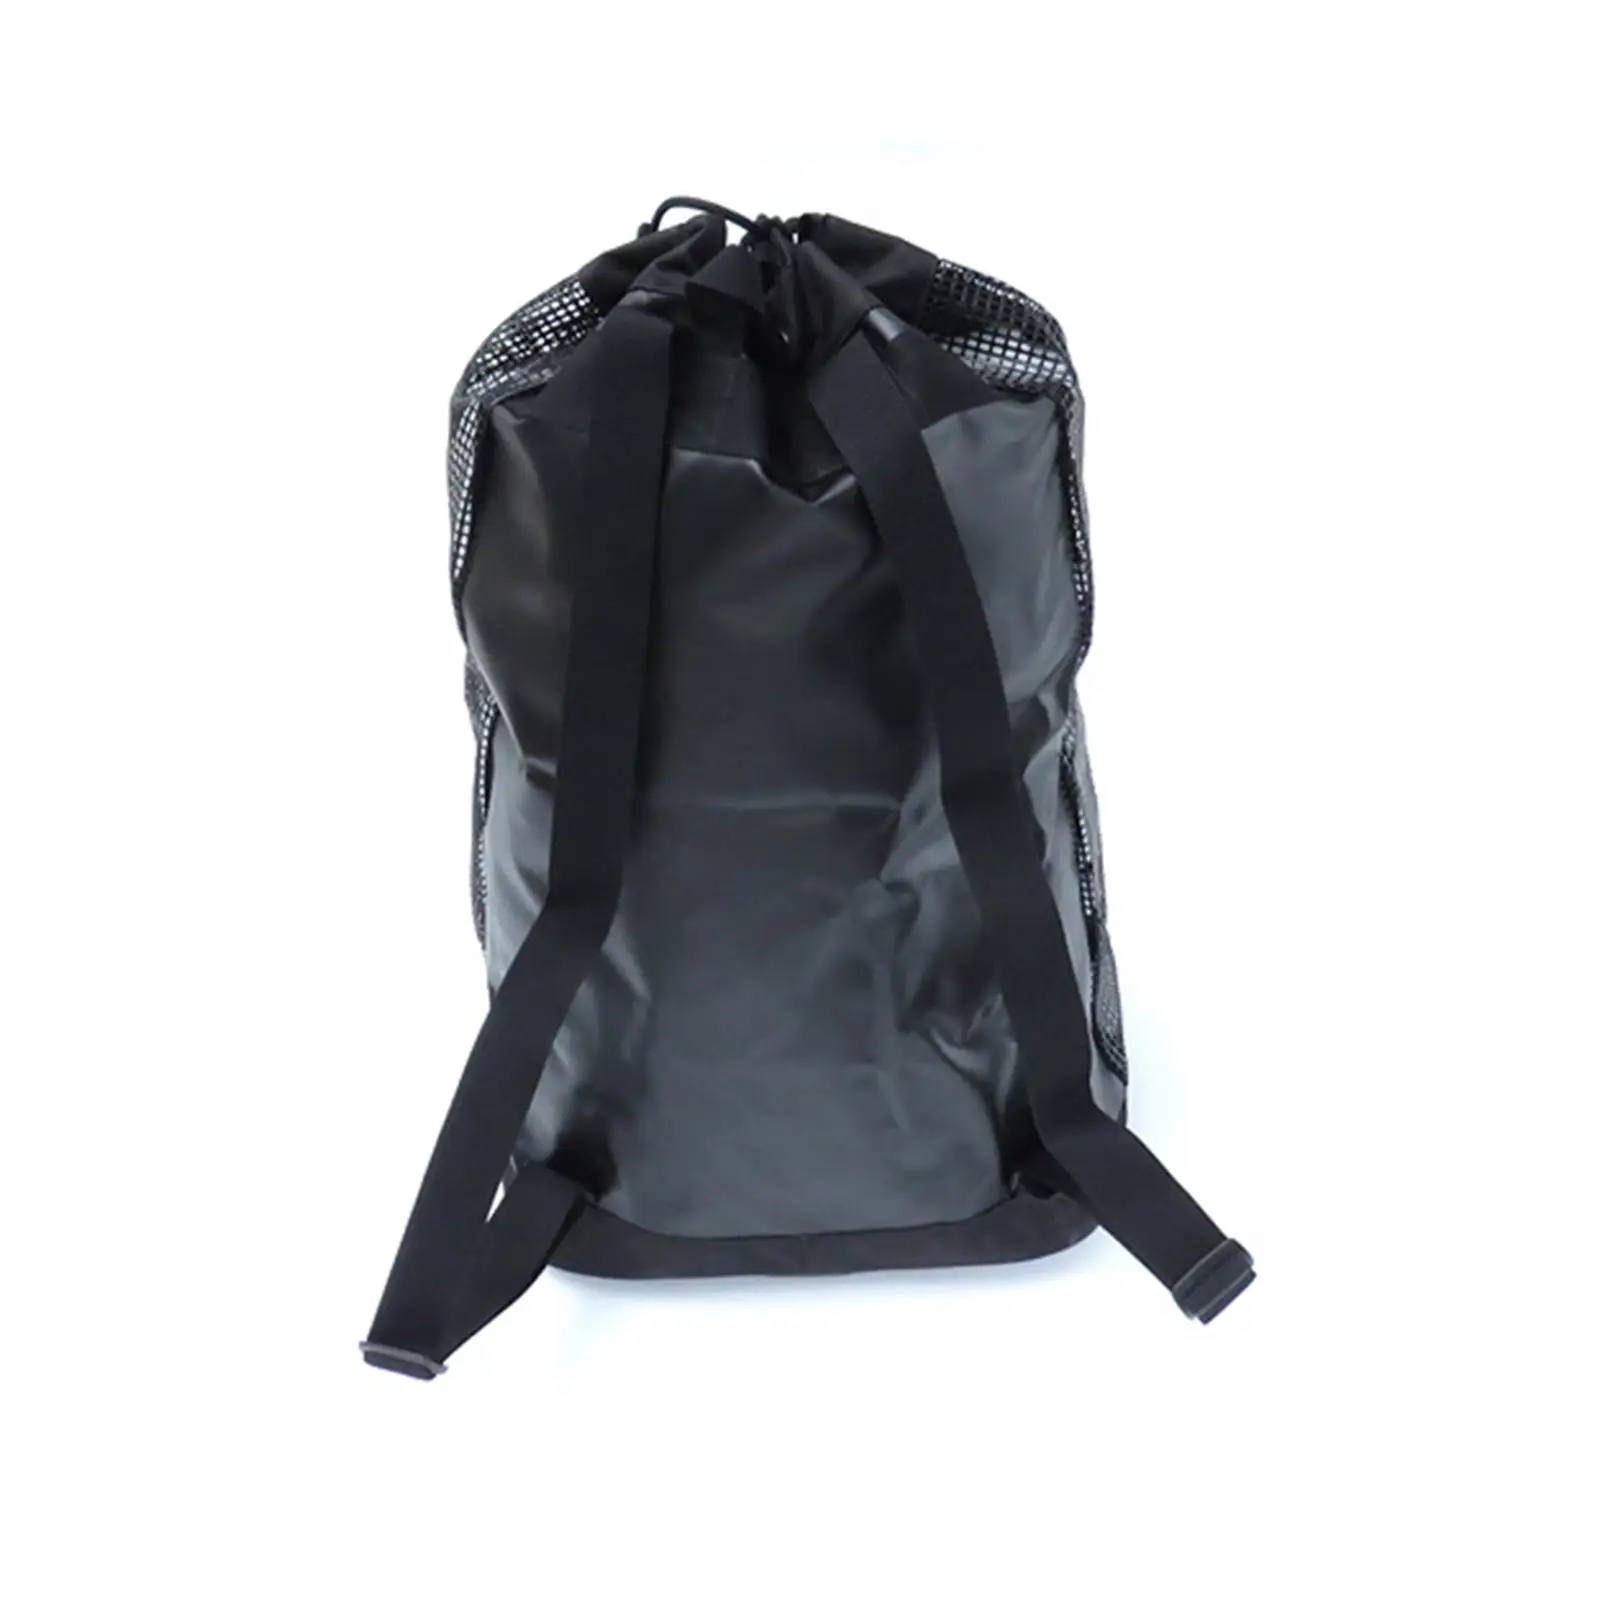 Scuba Diving Bag Knapsack for Mask, Fins and Wetsuit Diving Gear Bag for Equipment Scuba Diving Snorkeling Gear Water Sport Gear